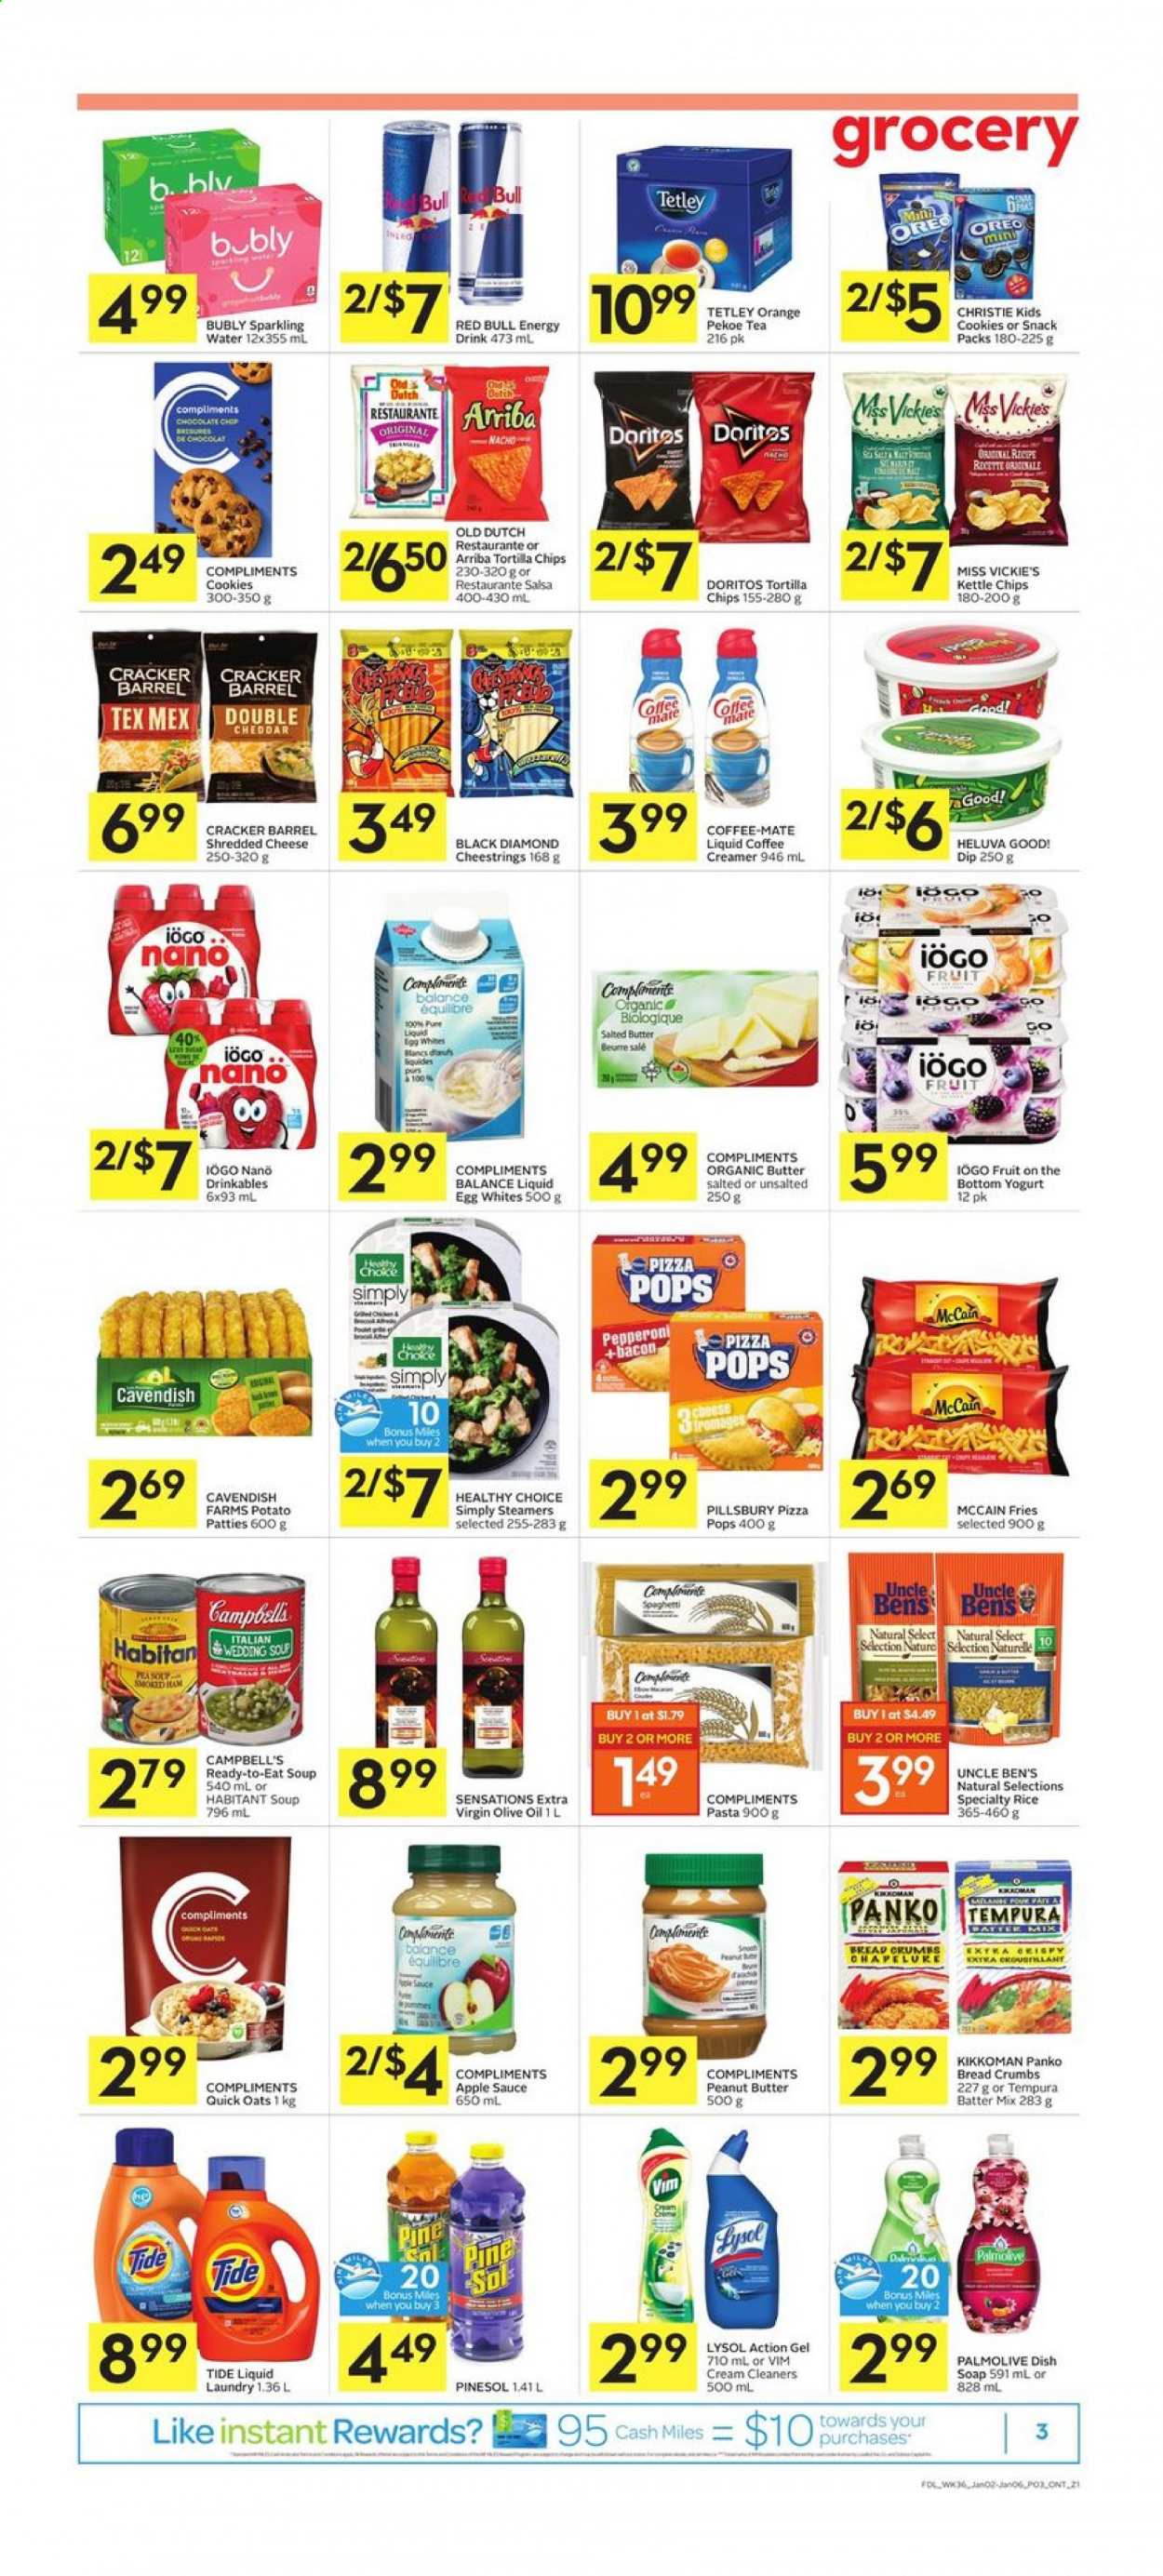 thumbnail - Foodland Flyer - January 02, 2021 - January 06, 2021 - Sales products - panko breadcrumbs, Campbell's, pizza, soup, pasta, sauce, Pillsbury, Healthy Choice, bacon, pepperoni, shredded cheese, string cheese, Oreo, yoghurt, Coffee-Mate, eggs, salted butter, creamer, McCain, potato fries, cookies, chocolate, crackers, Doritos, tortilla chips, oats, Uncle Ben's, Quick Oats, rice, Kikkoman, salsa, extra virgin olive oil, olive oil, oil, apple sauce, peanut butter, energy drink, Red Bull, sparkling water, tea, chips. Page 3.